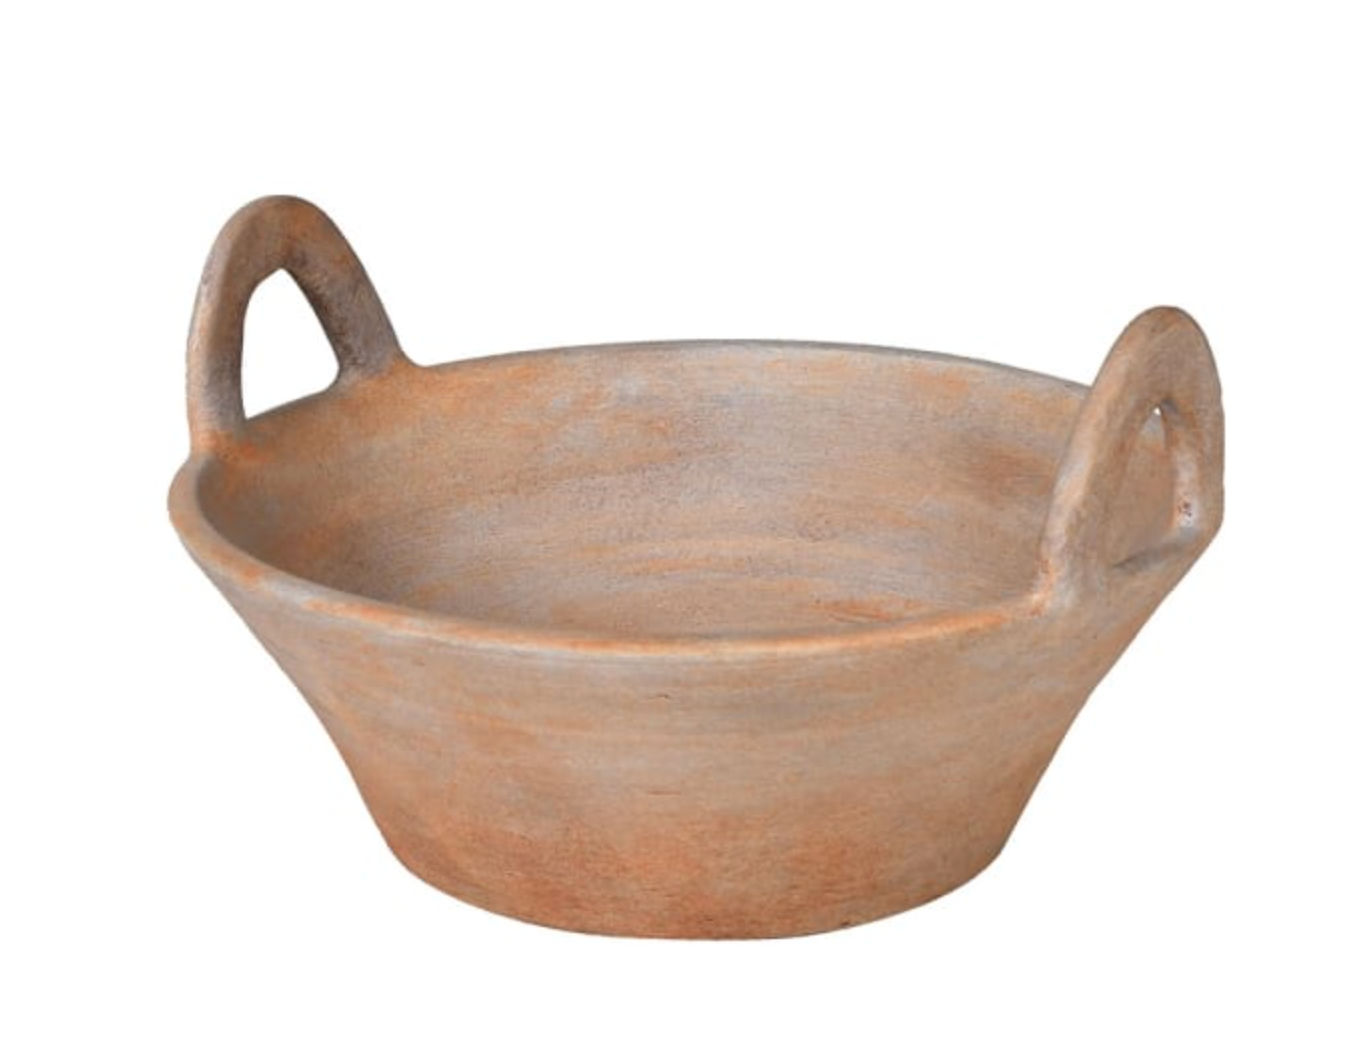 Distressed Pale Terracotta Bowl